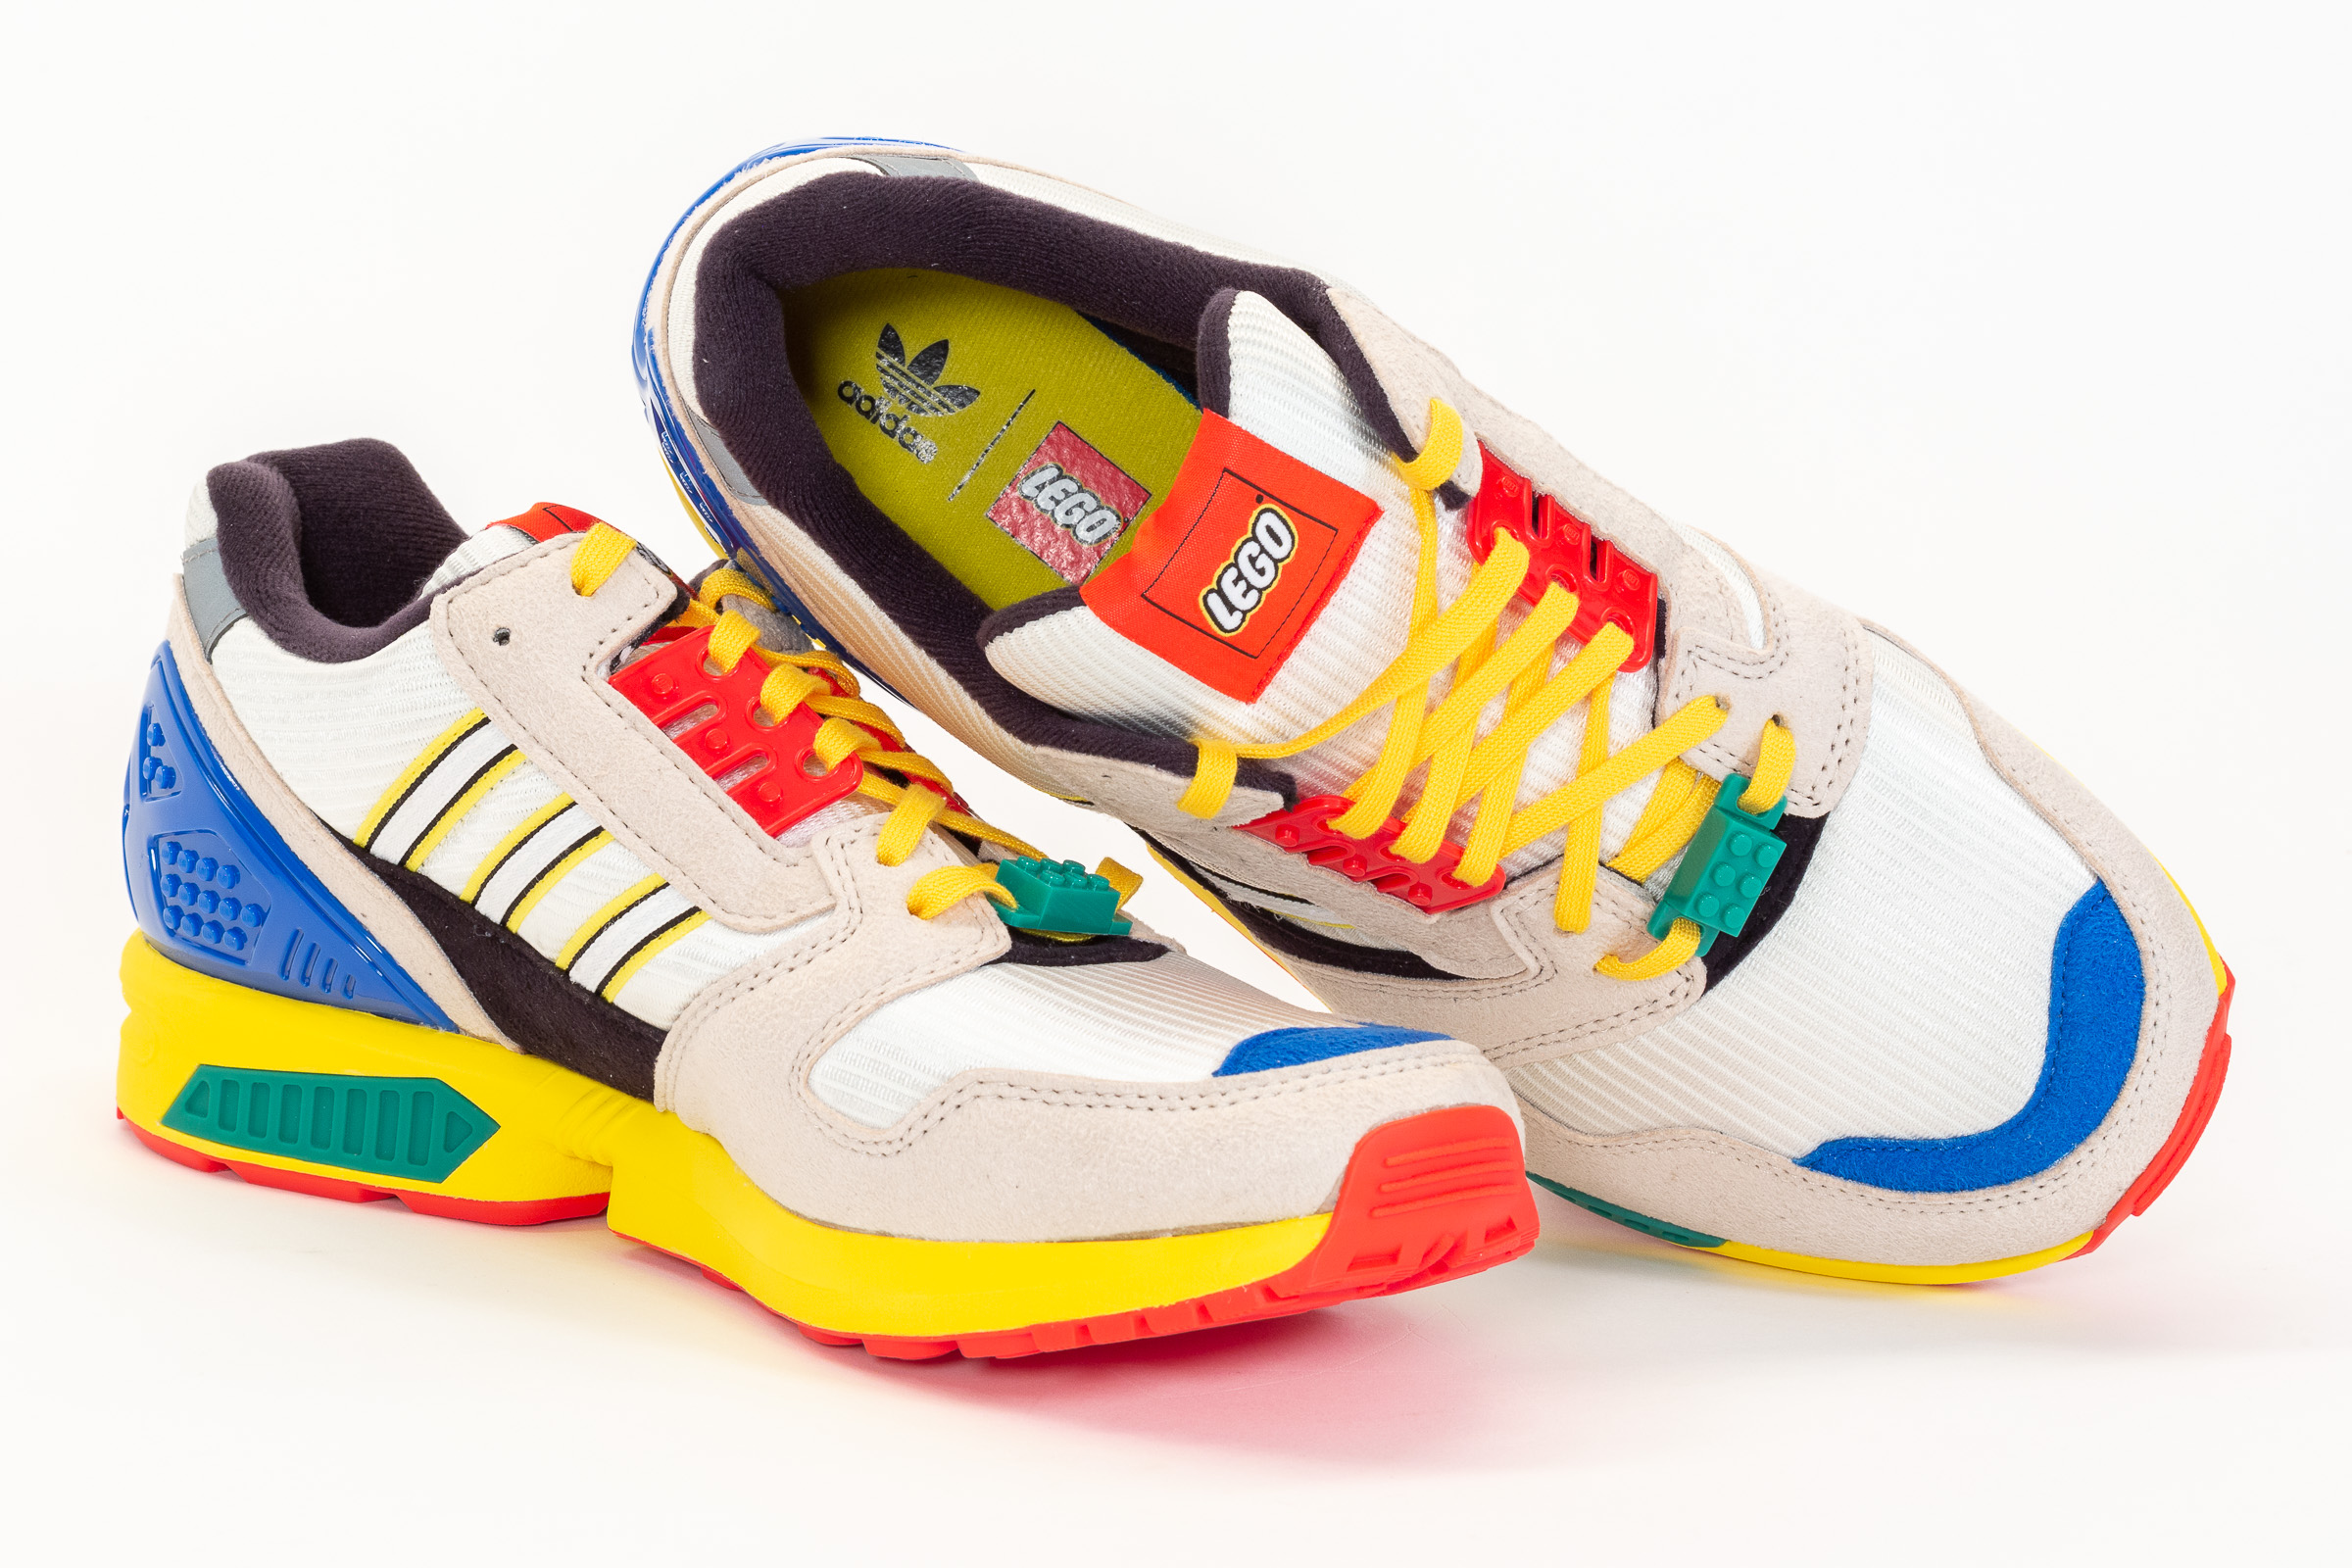 Review: LEGO x Adidas ZX 8000 Sneaker - Jay's Brick Blog